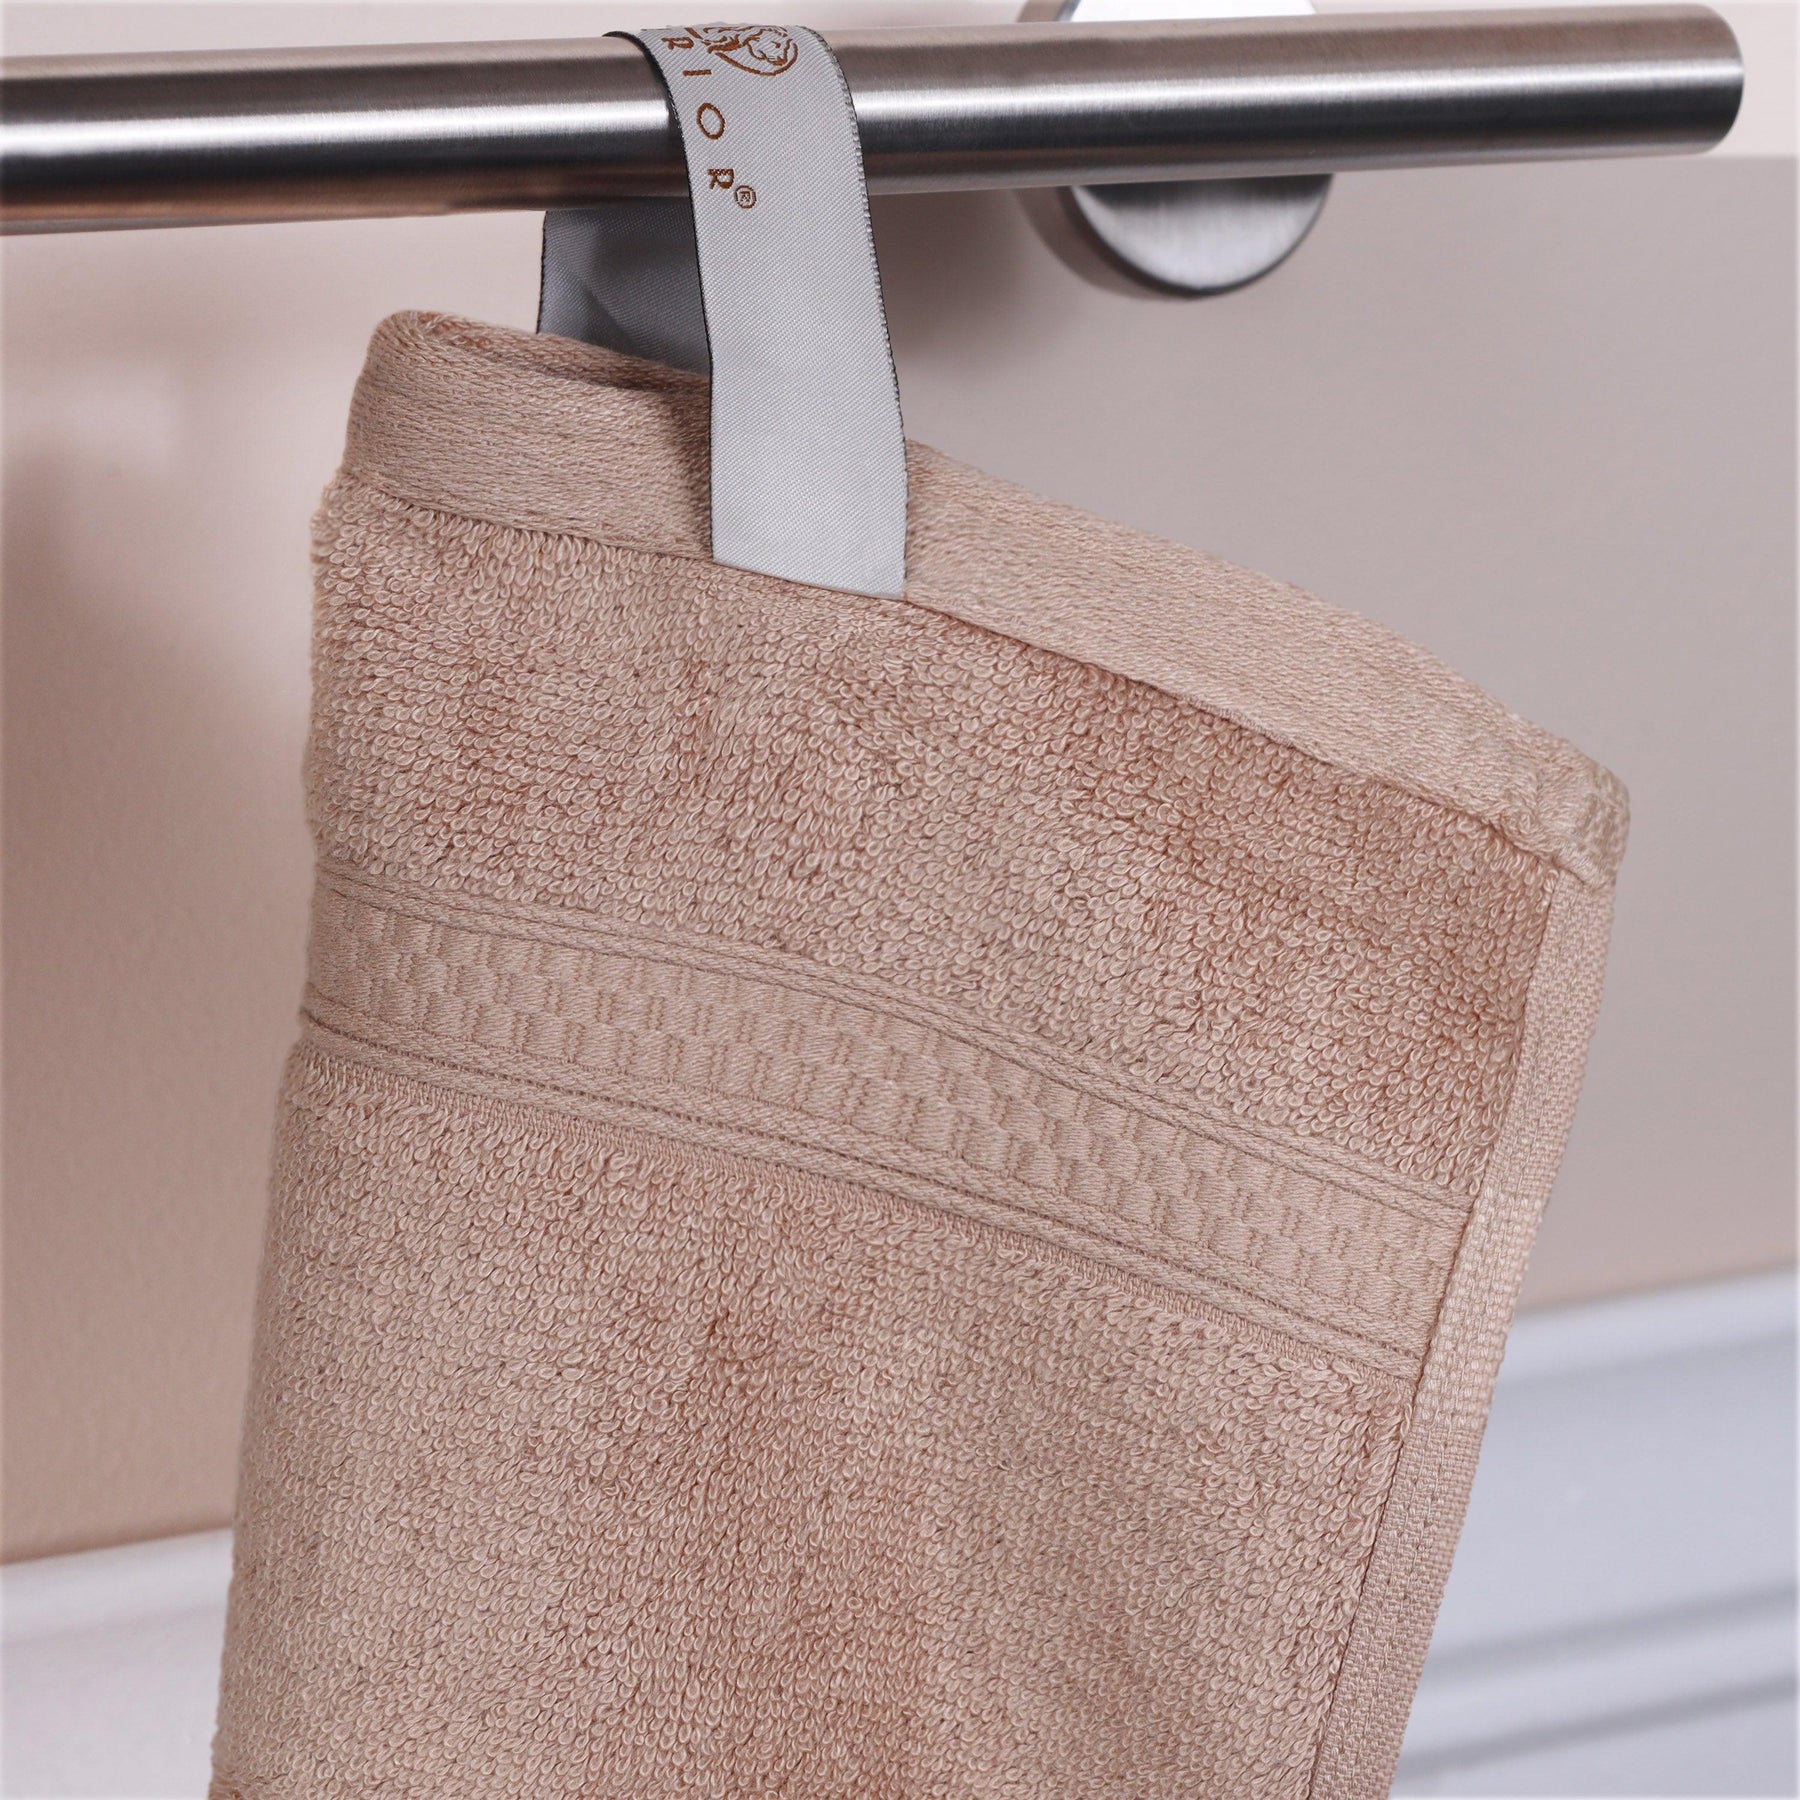  Ultra-Soft Hypoallergenic Rayon from Bamboo Cotton Blend Assorted Bath Towel Set - Sand